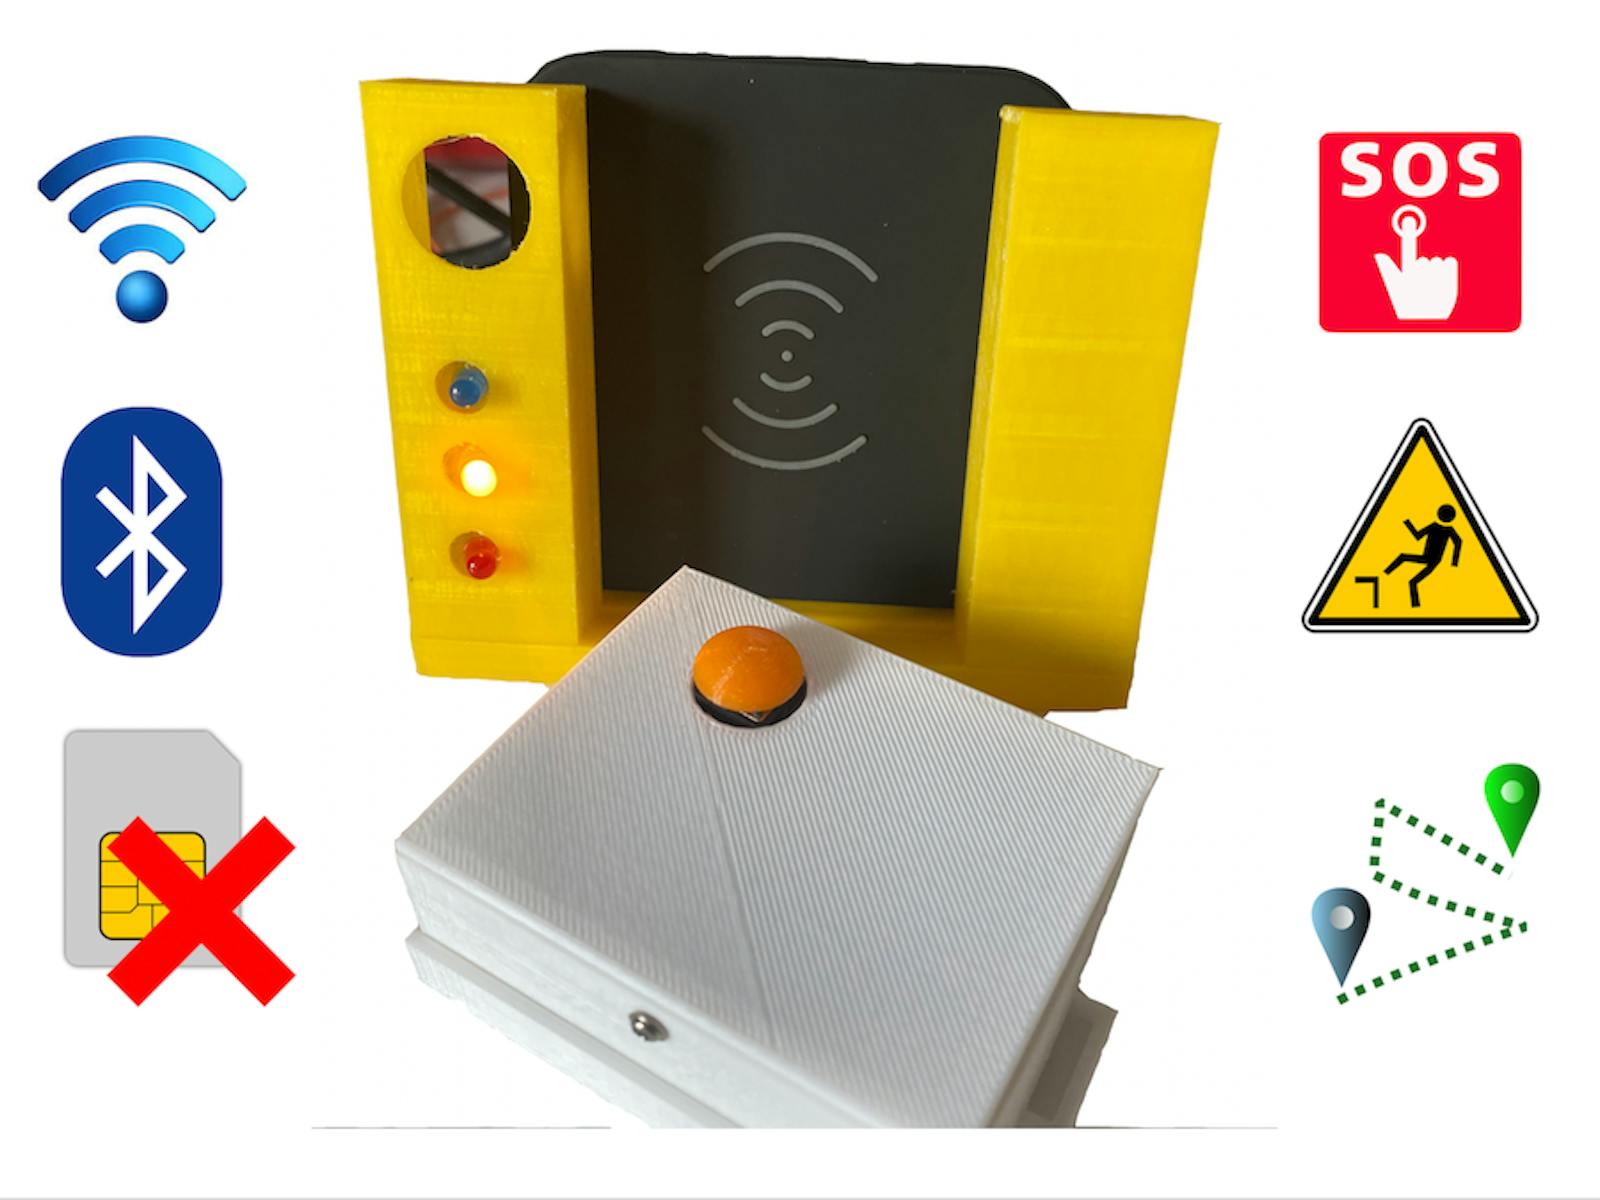 wearable panic button alarm for kids